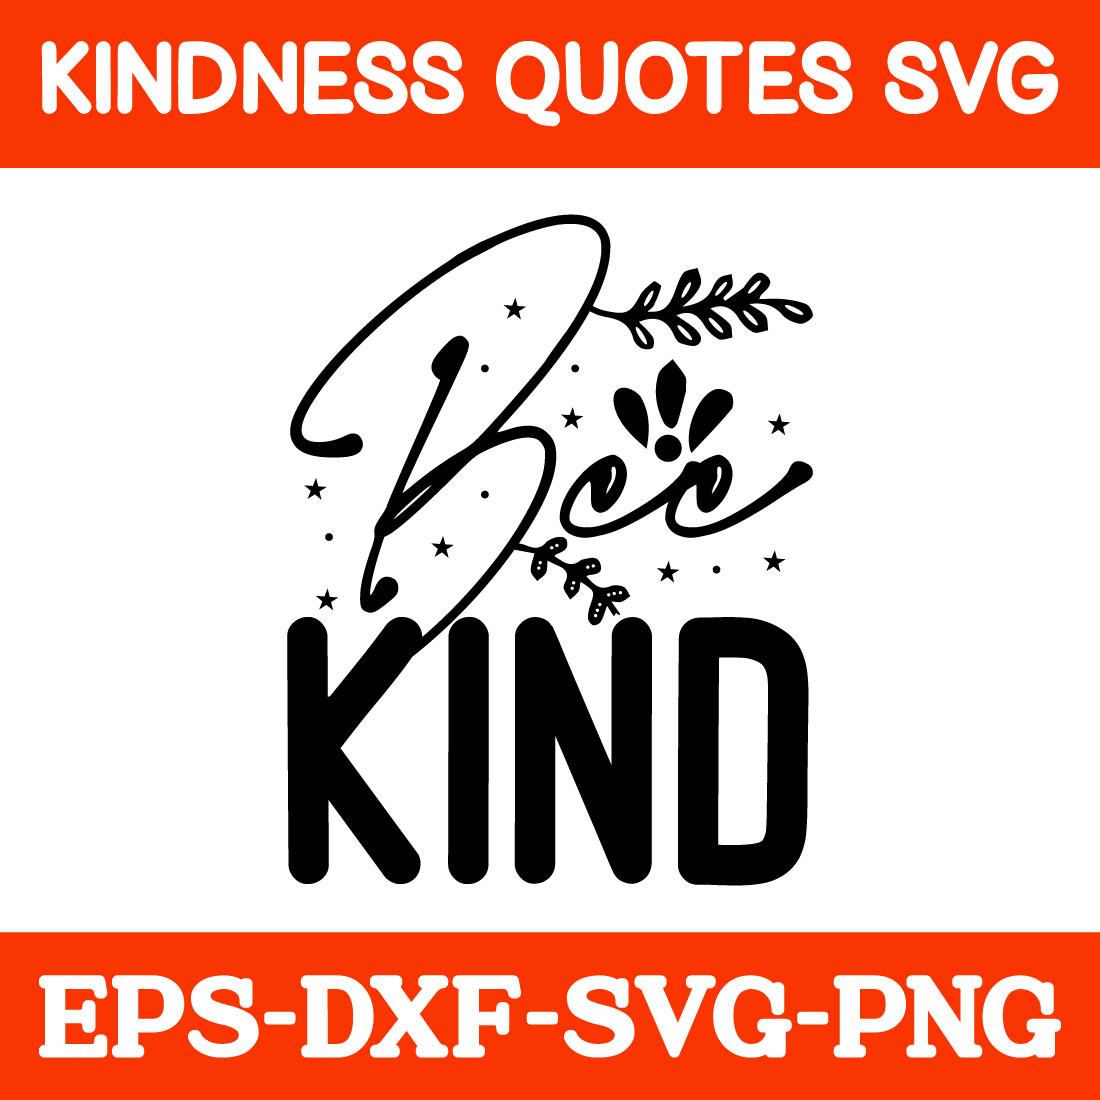 Kindness Quotes Svg Free cover image.